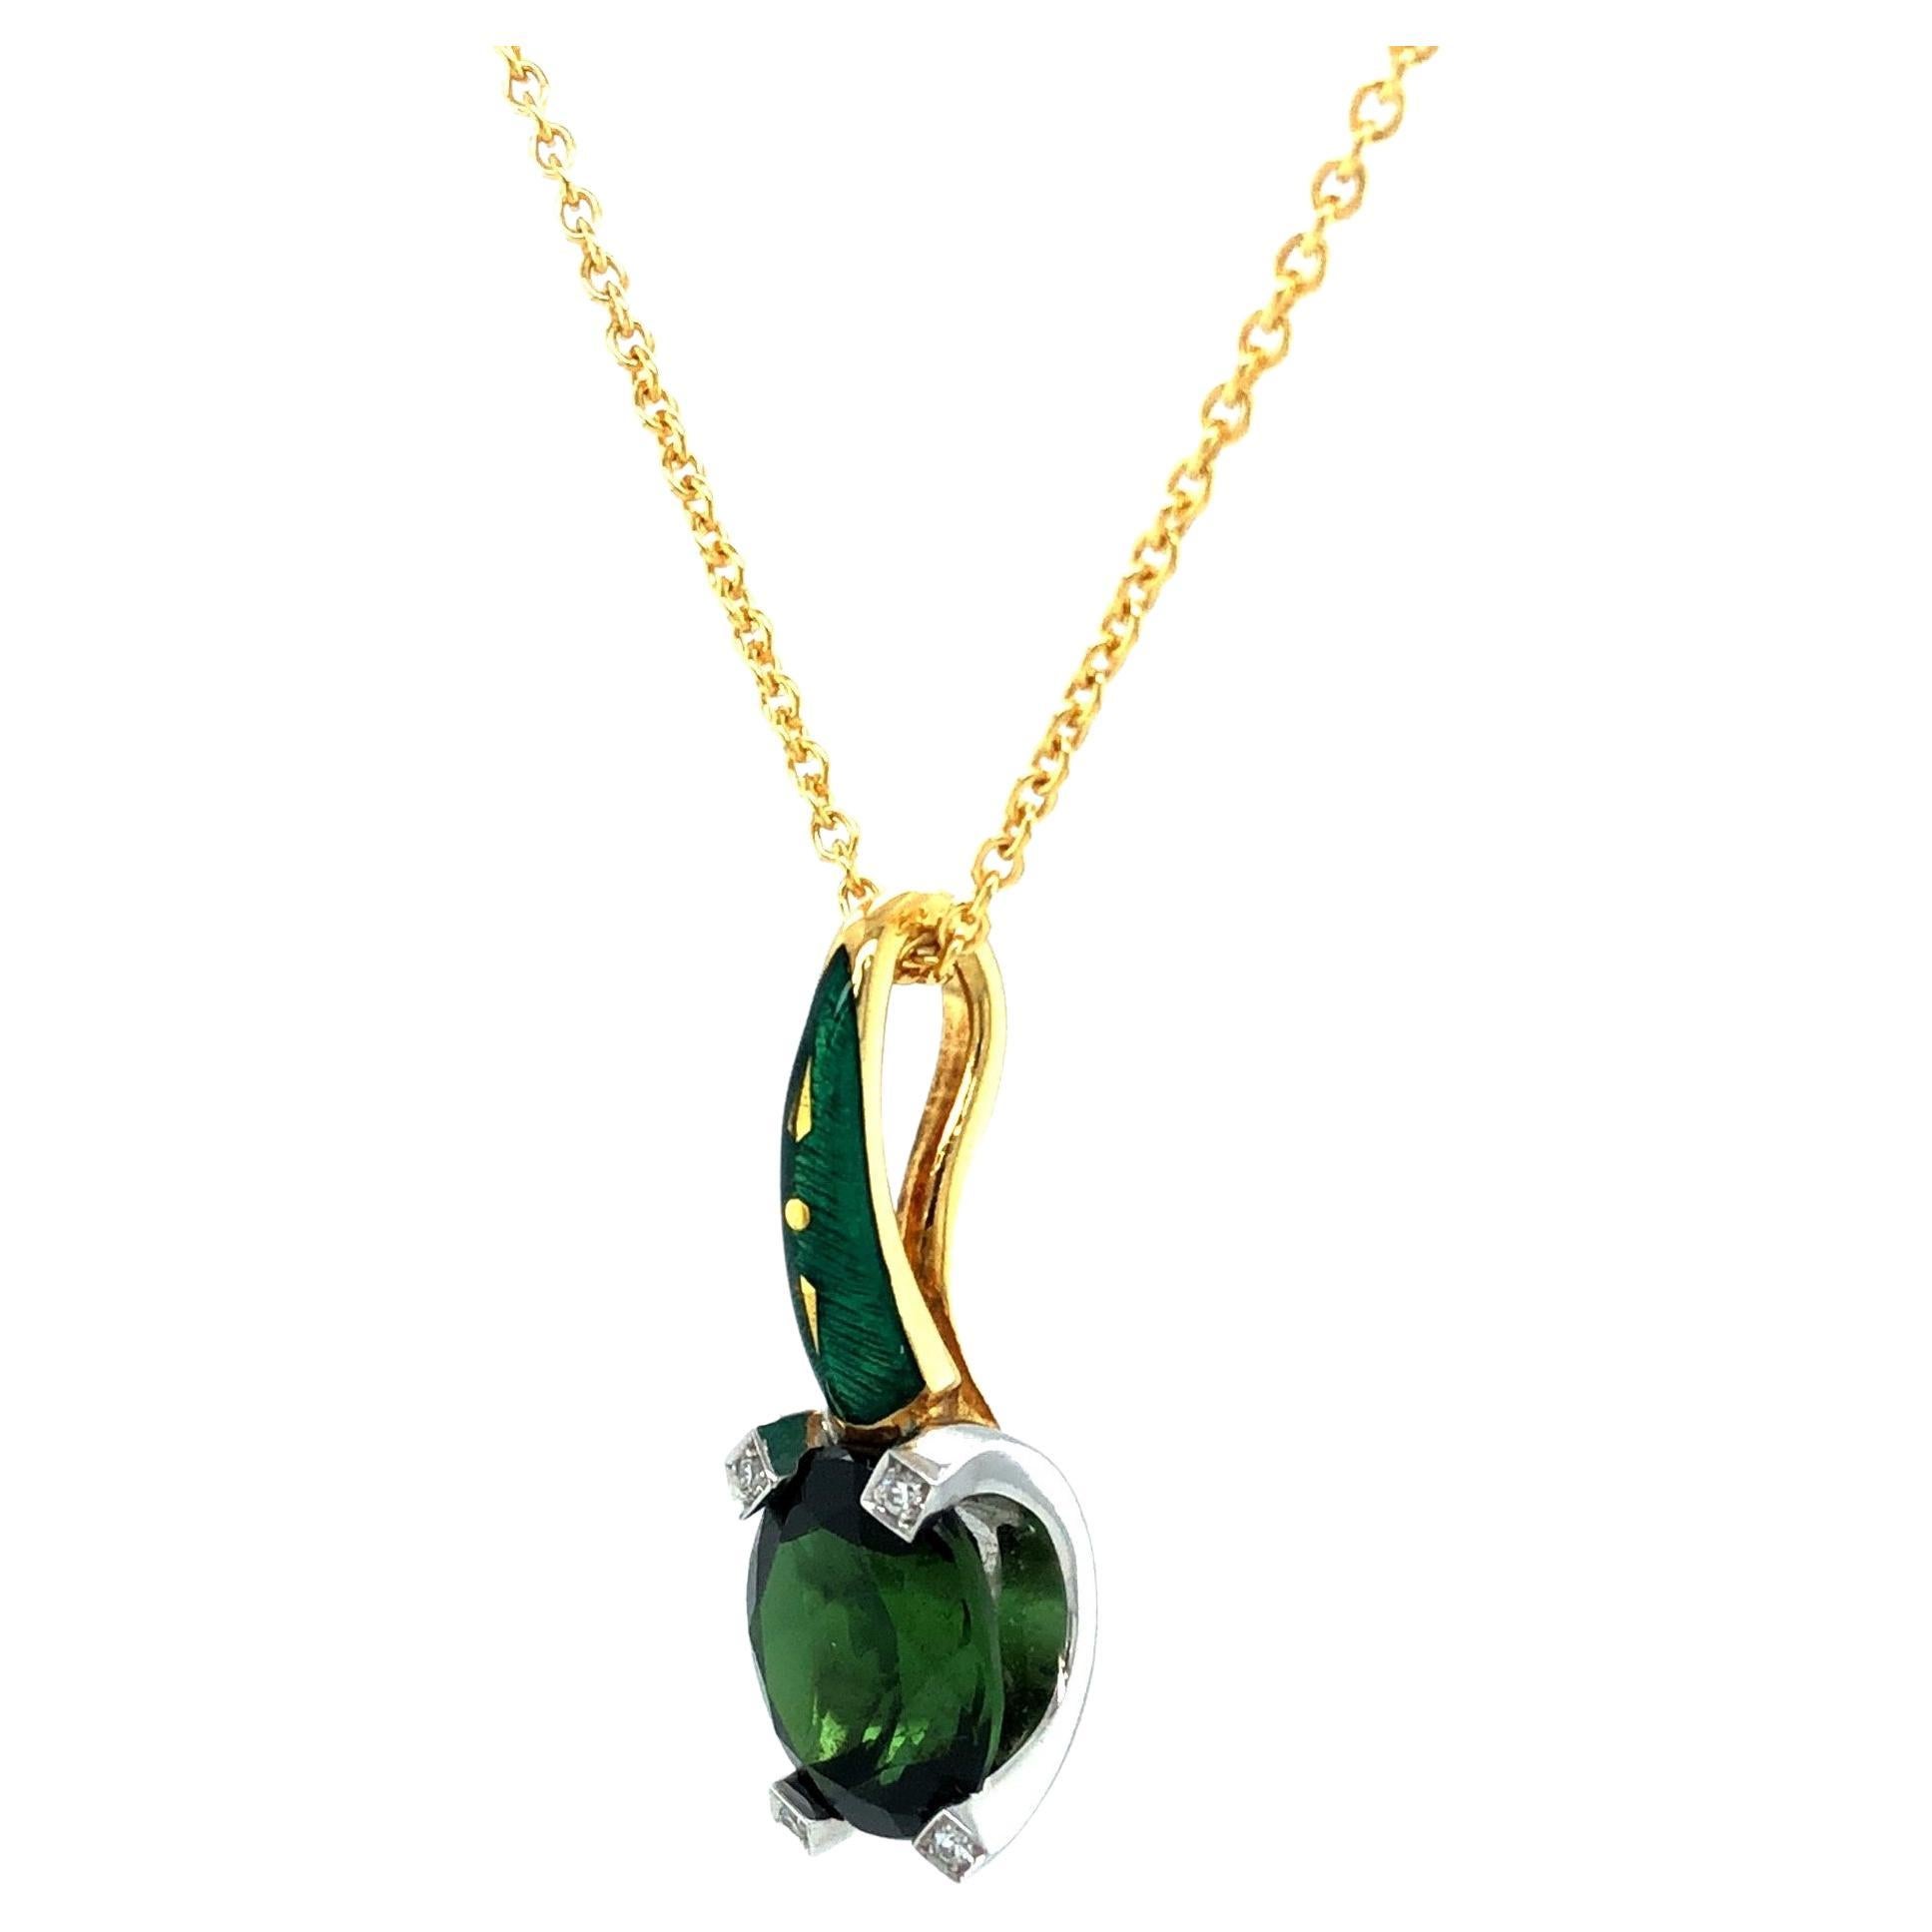 Victor Mayer pendant, Cocktail collection, 18k yellow gold white gold, emerald green vitreous enamel with three paillons, 5 diamonds, total 0.03 ct, G VS, green Tourmaline

About the creator Victor Mayer
Victor Mayer is internationally renowned for